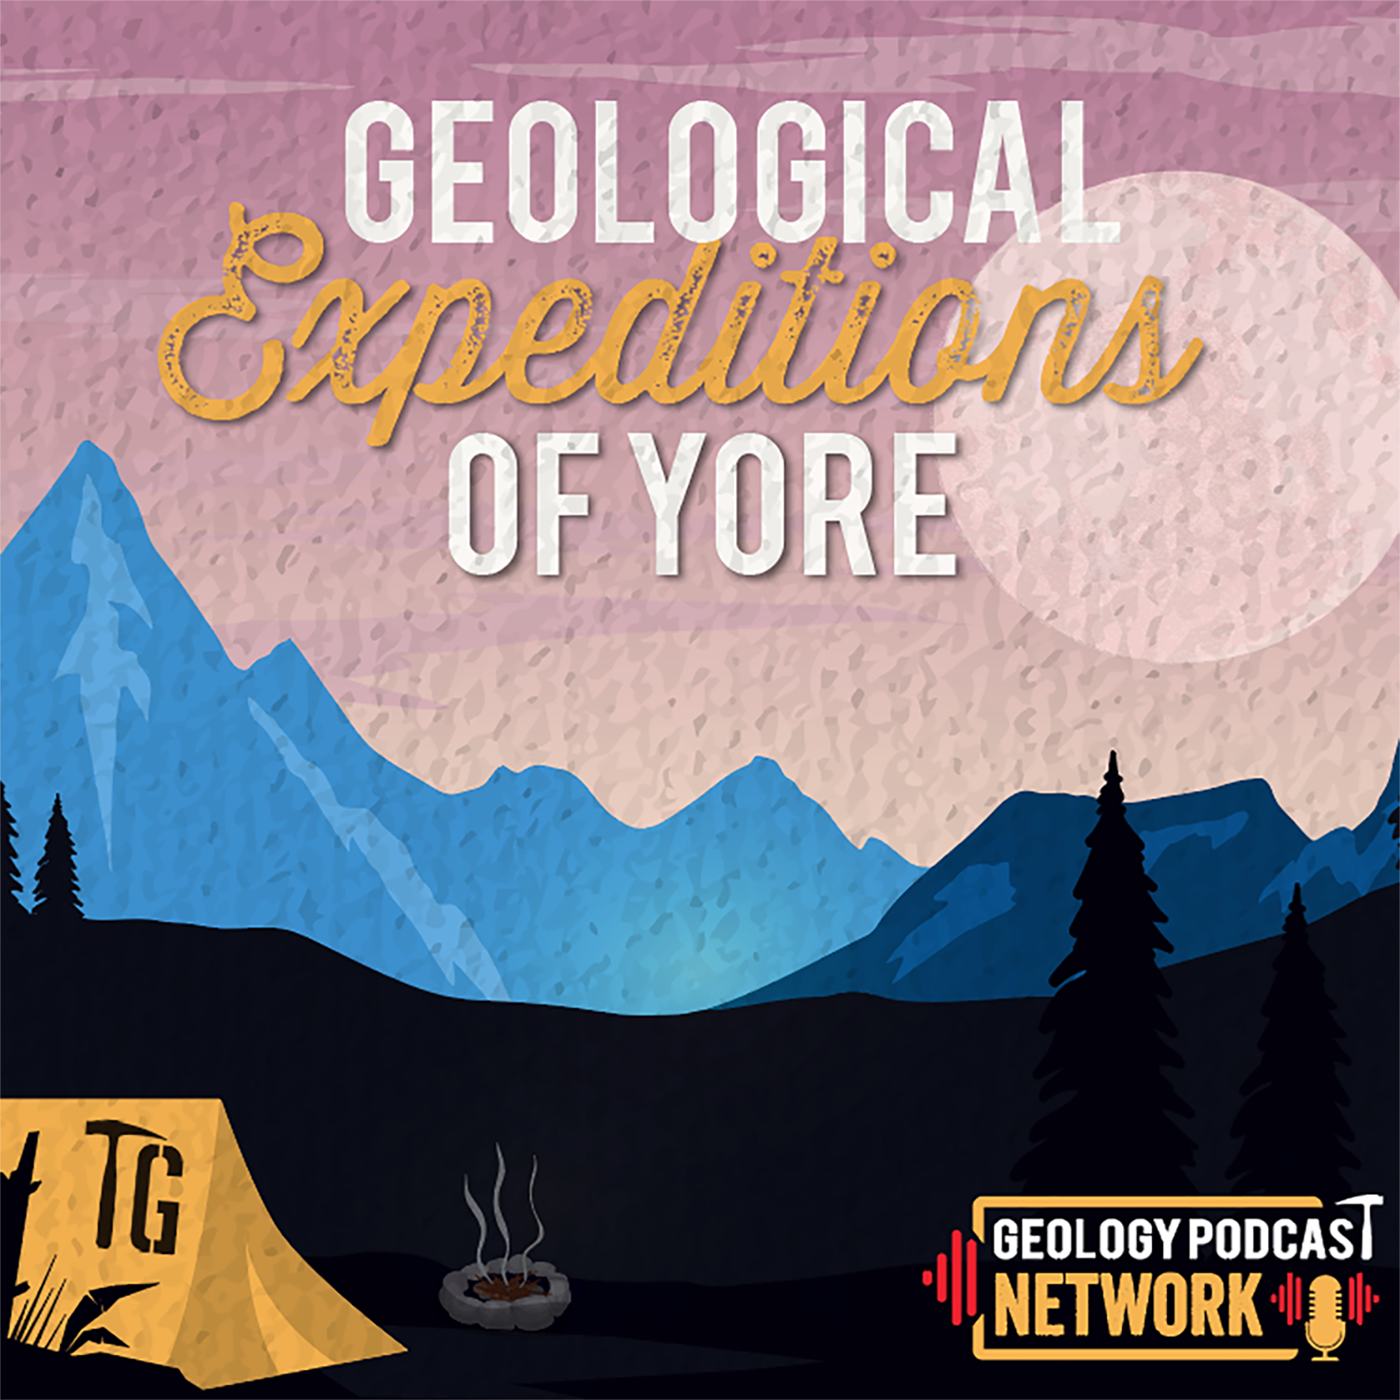 Geological Expeditions of Yore Podcast artwork